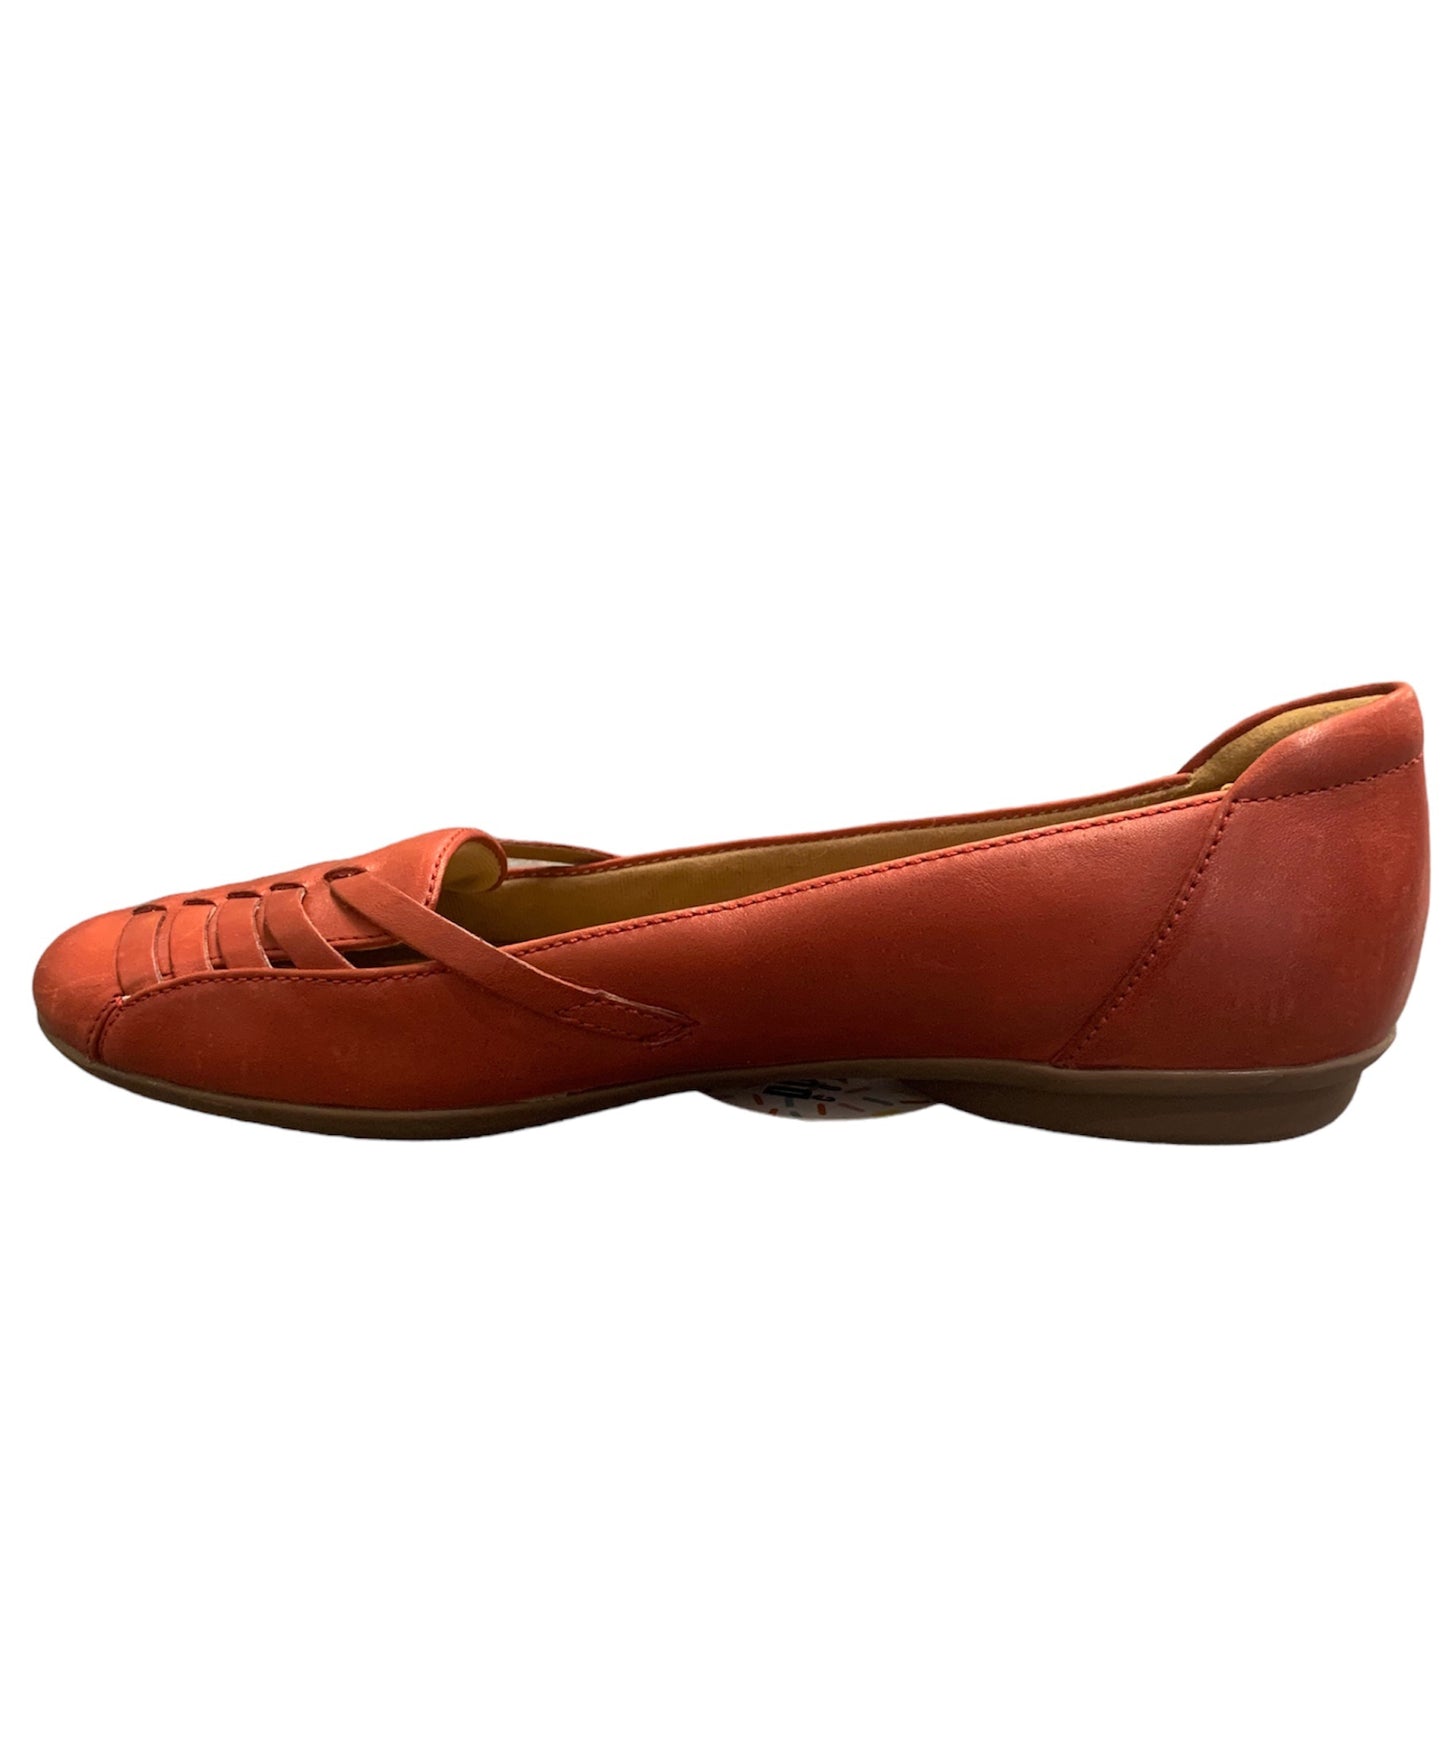 Red leather flats by Clarks